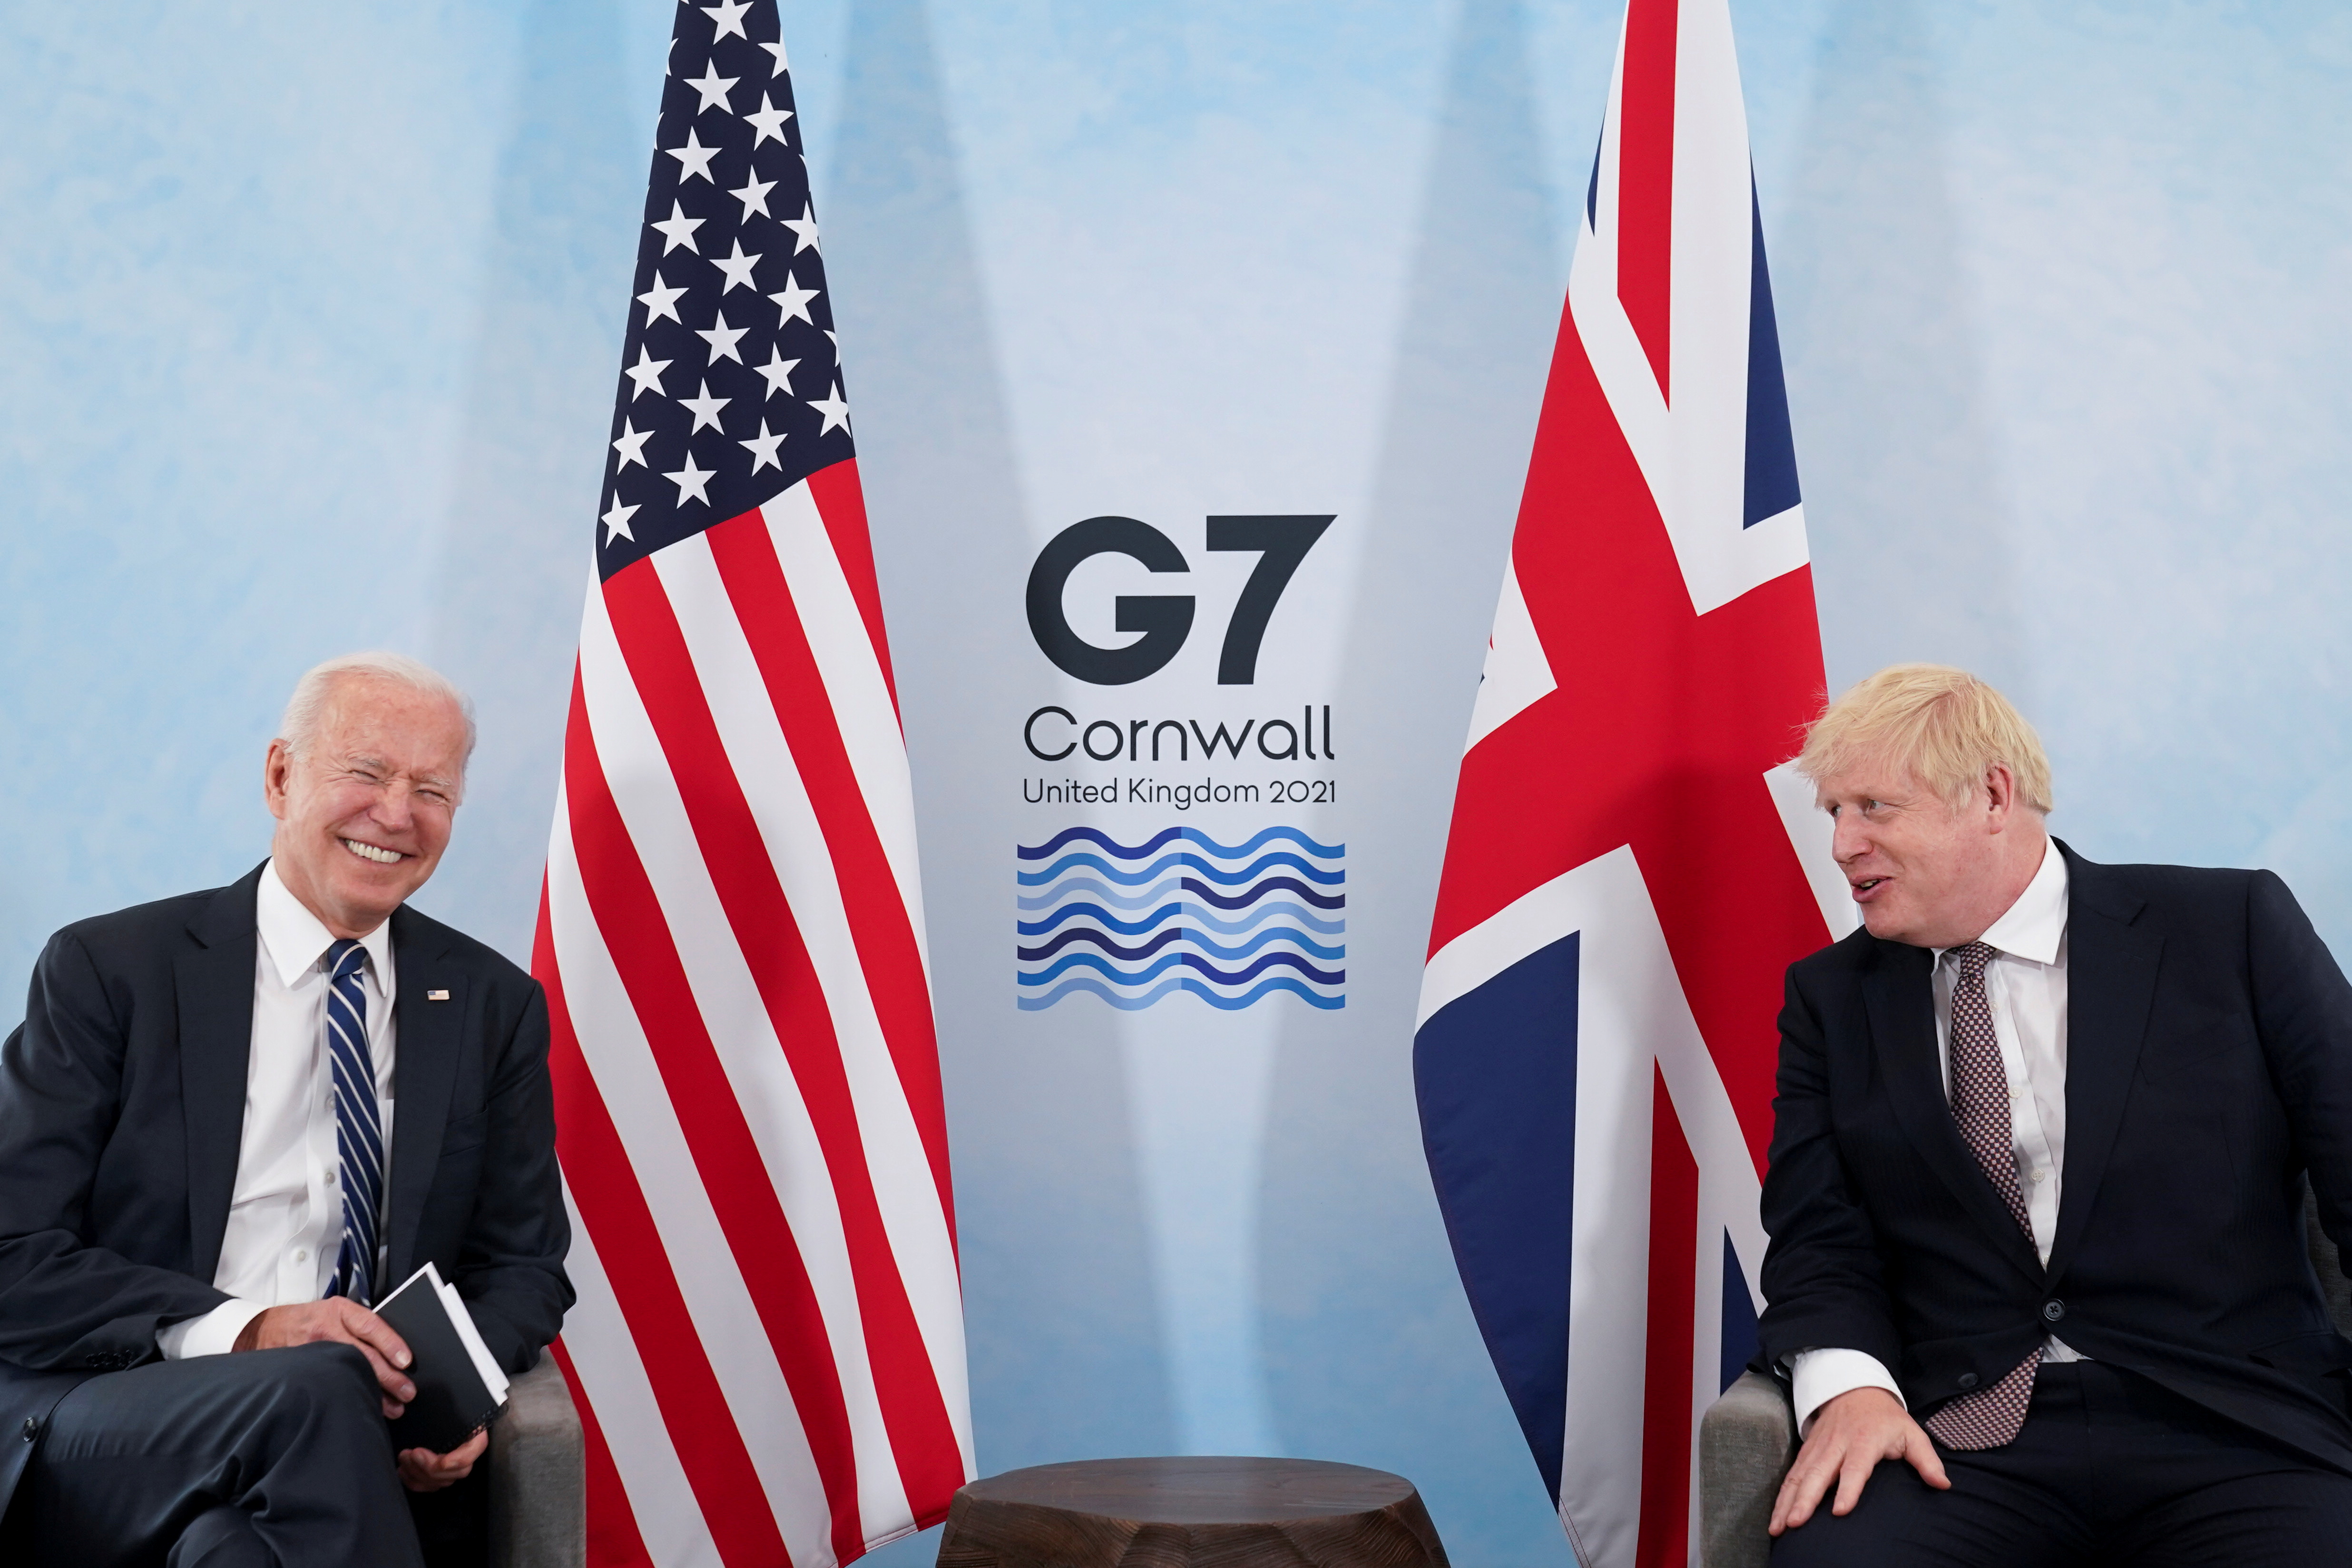 U.S. President Joe Biden laughs while speaking with Britain's Prime Minister Boris Johnson during their meeting, ahead of the G7 summit, at Carbis Bay, Cornwall, Britain June 10, 2021REUTERS/Kevin Lamarque